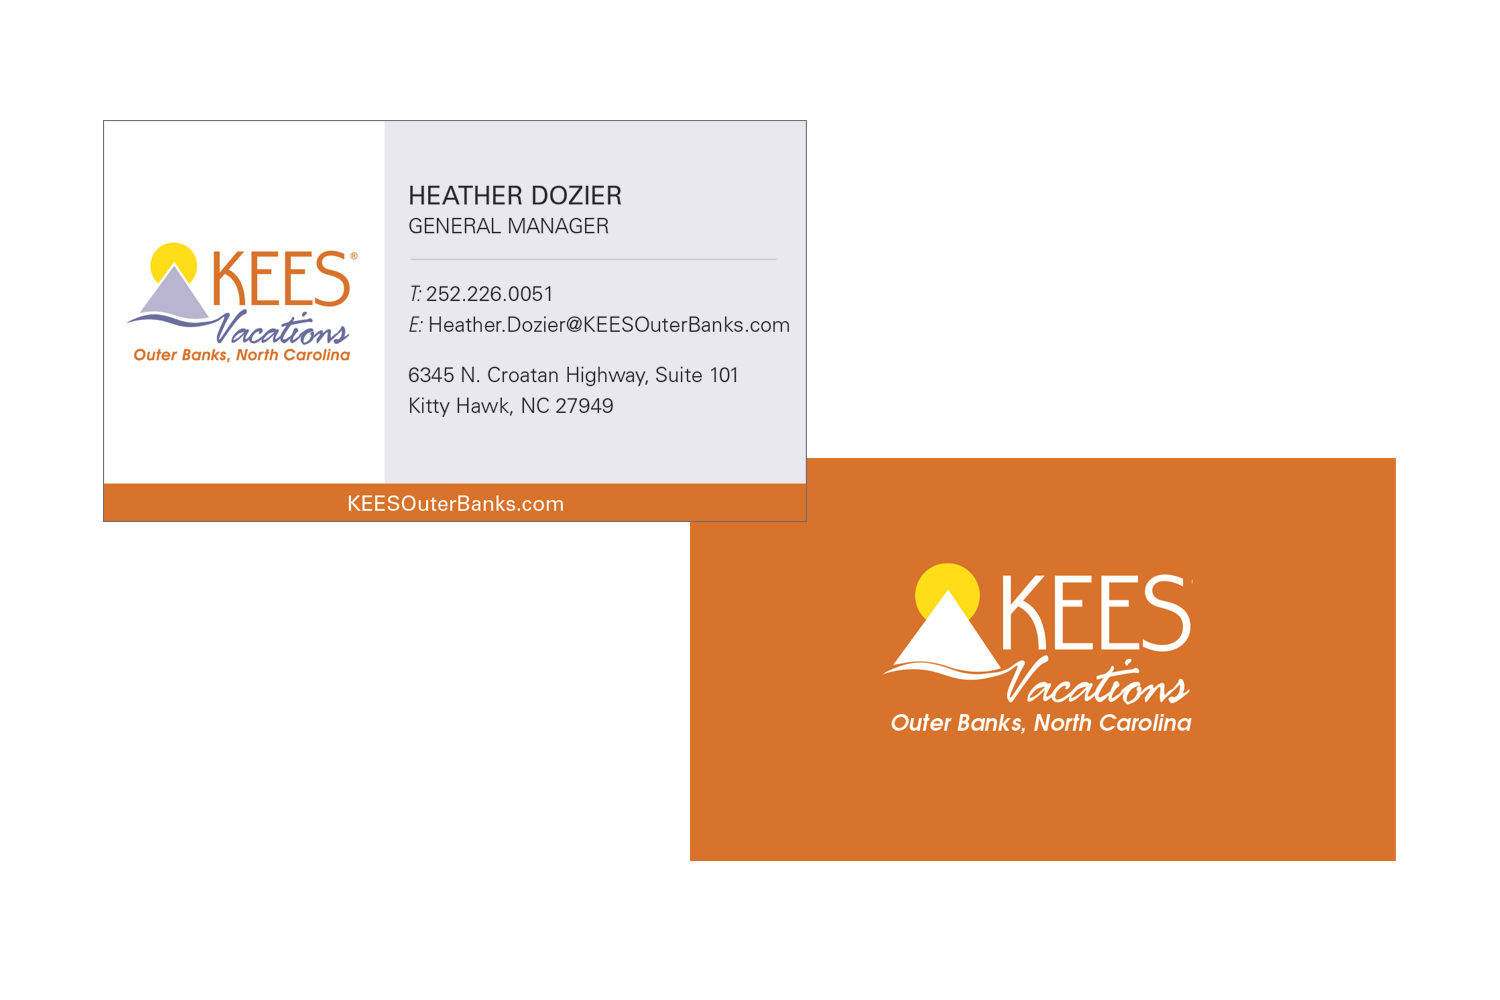 kees-business-cards